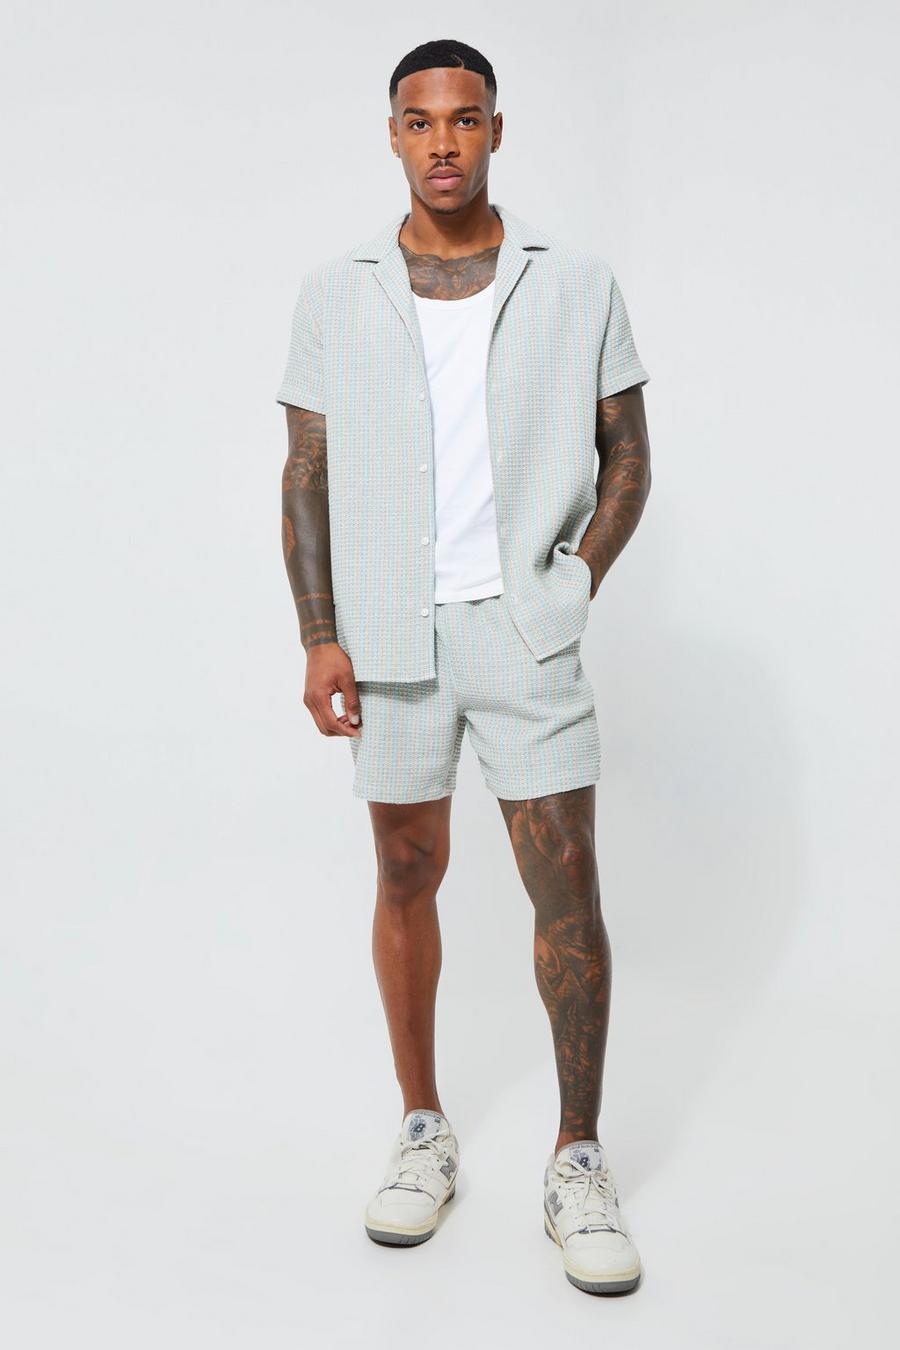 Men's Two Piece Sets | Men's Matching Sets | boohoo Canada